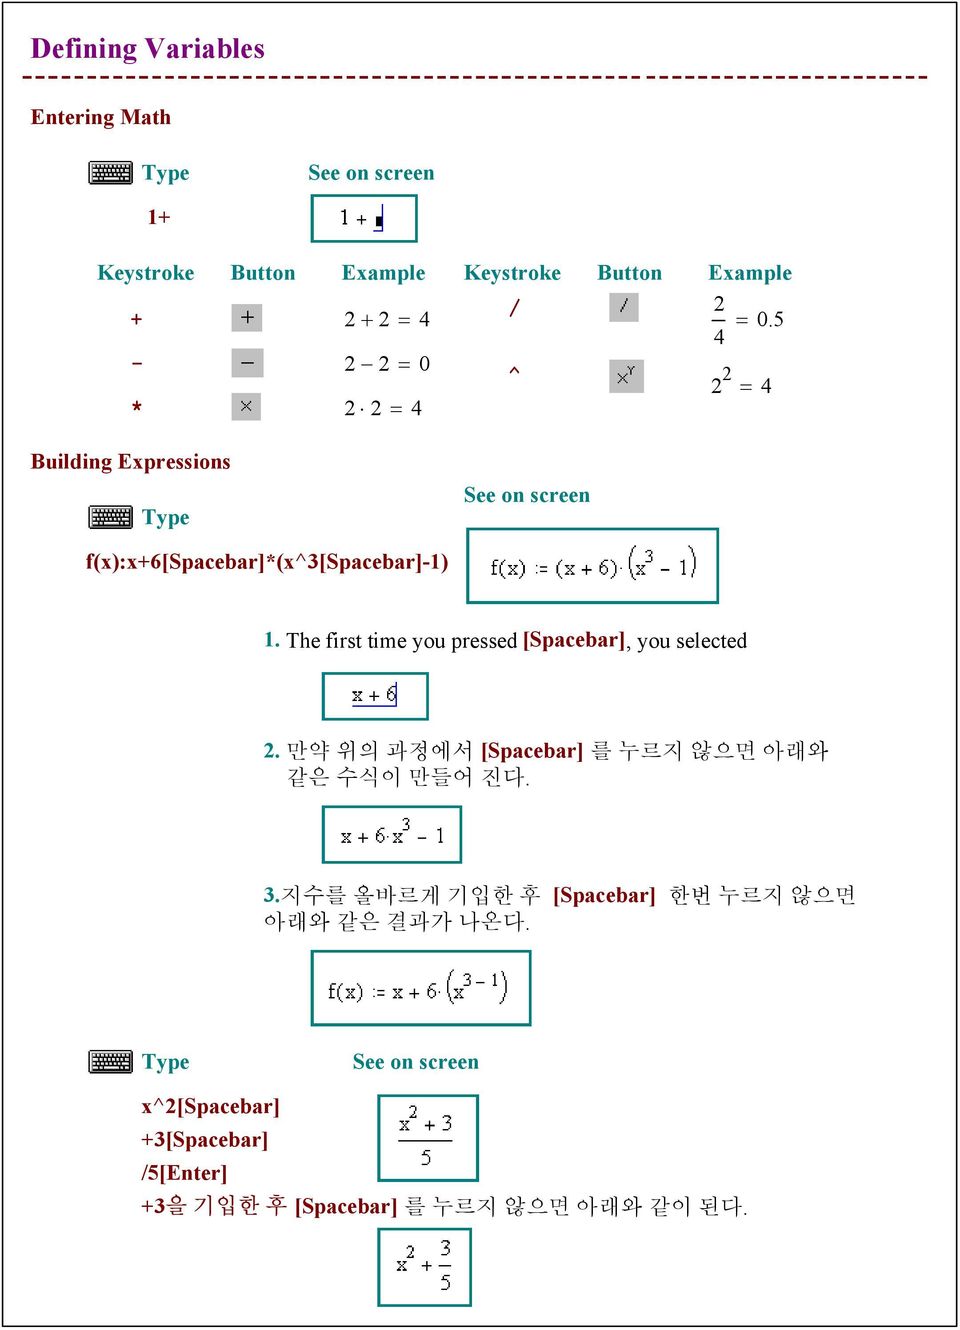 5 - * ^ Building Expressions Type See on screen f(x):x+6[spacebar]*(x^[spacebar]-).